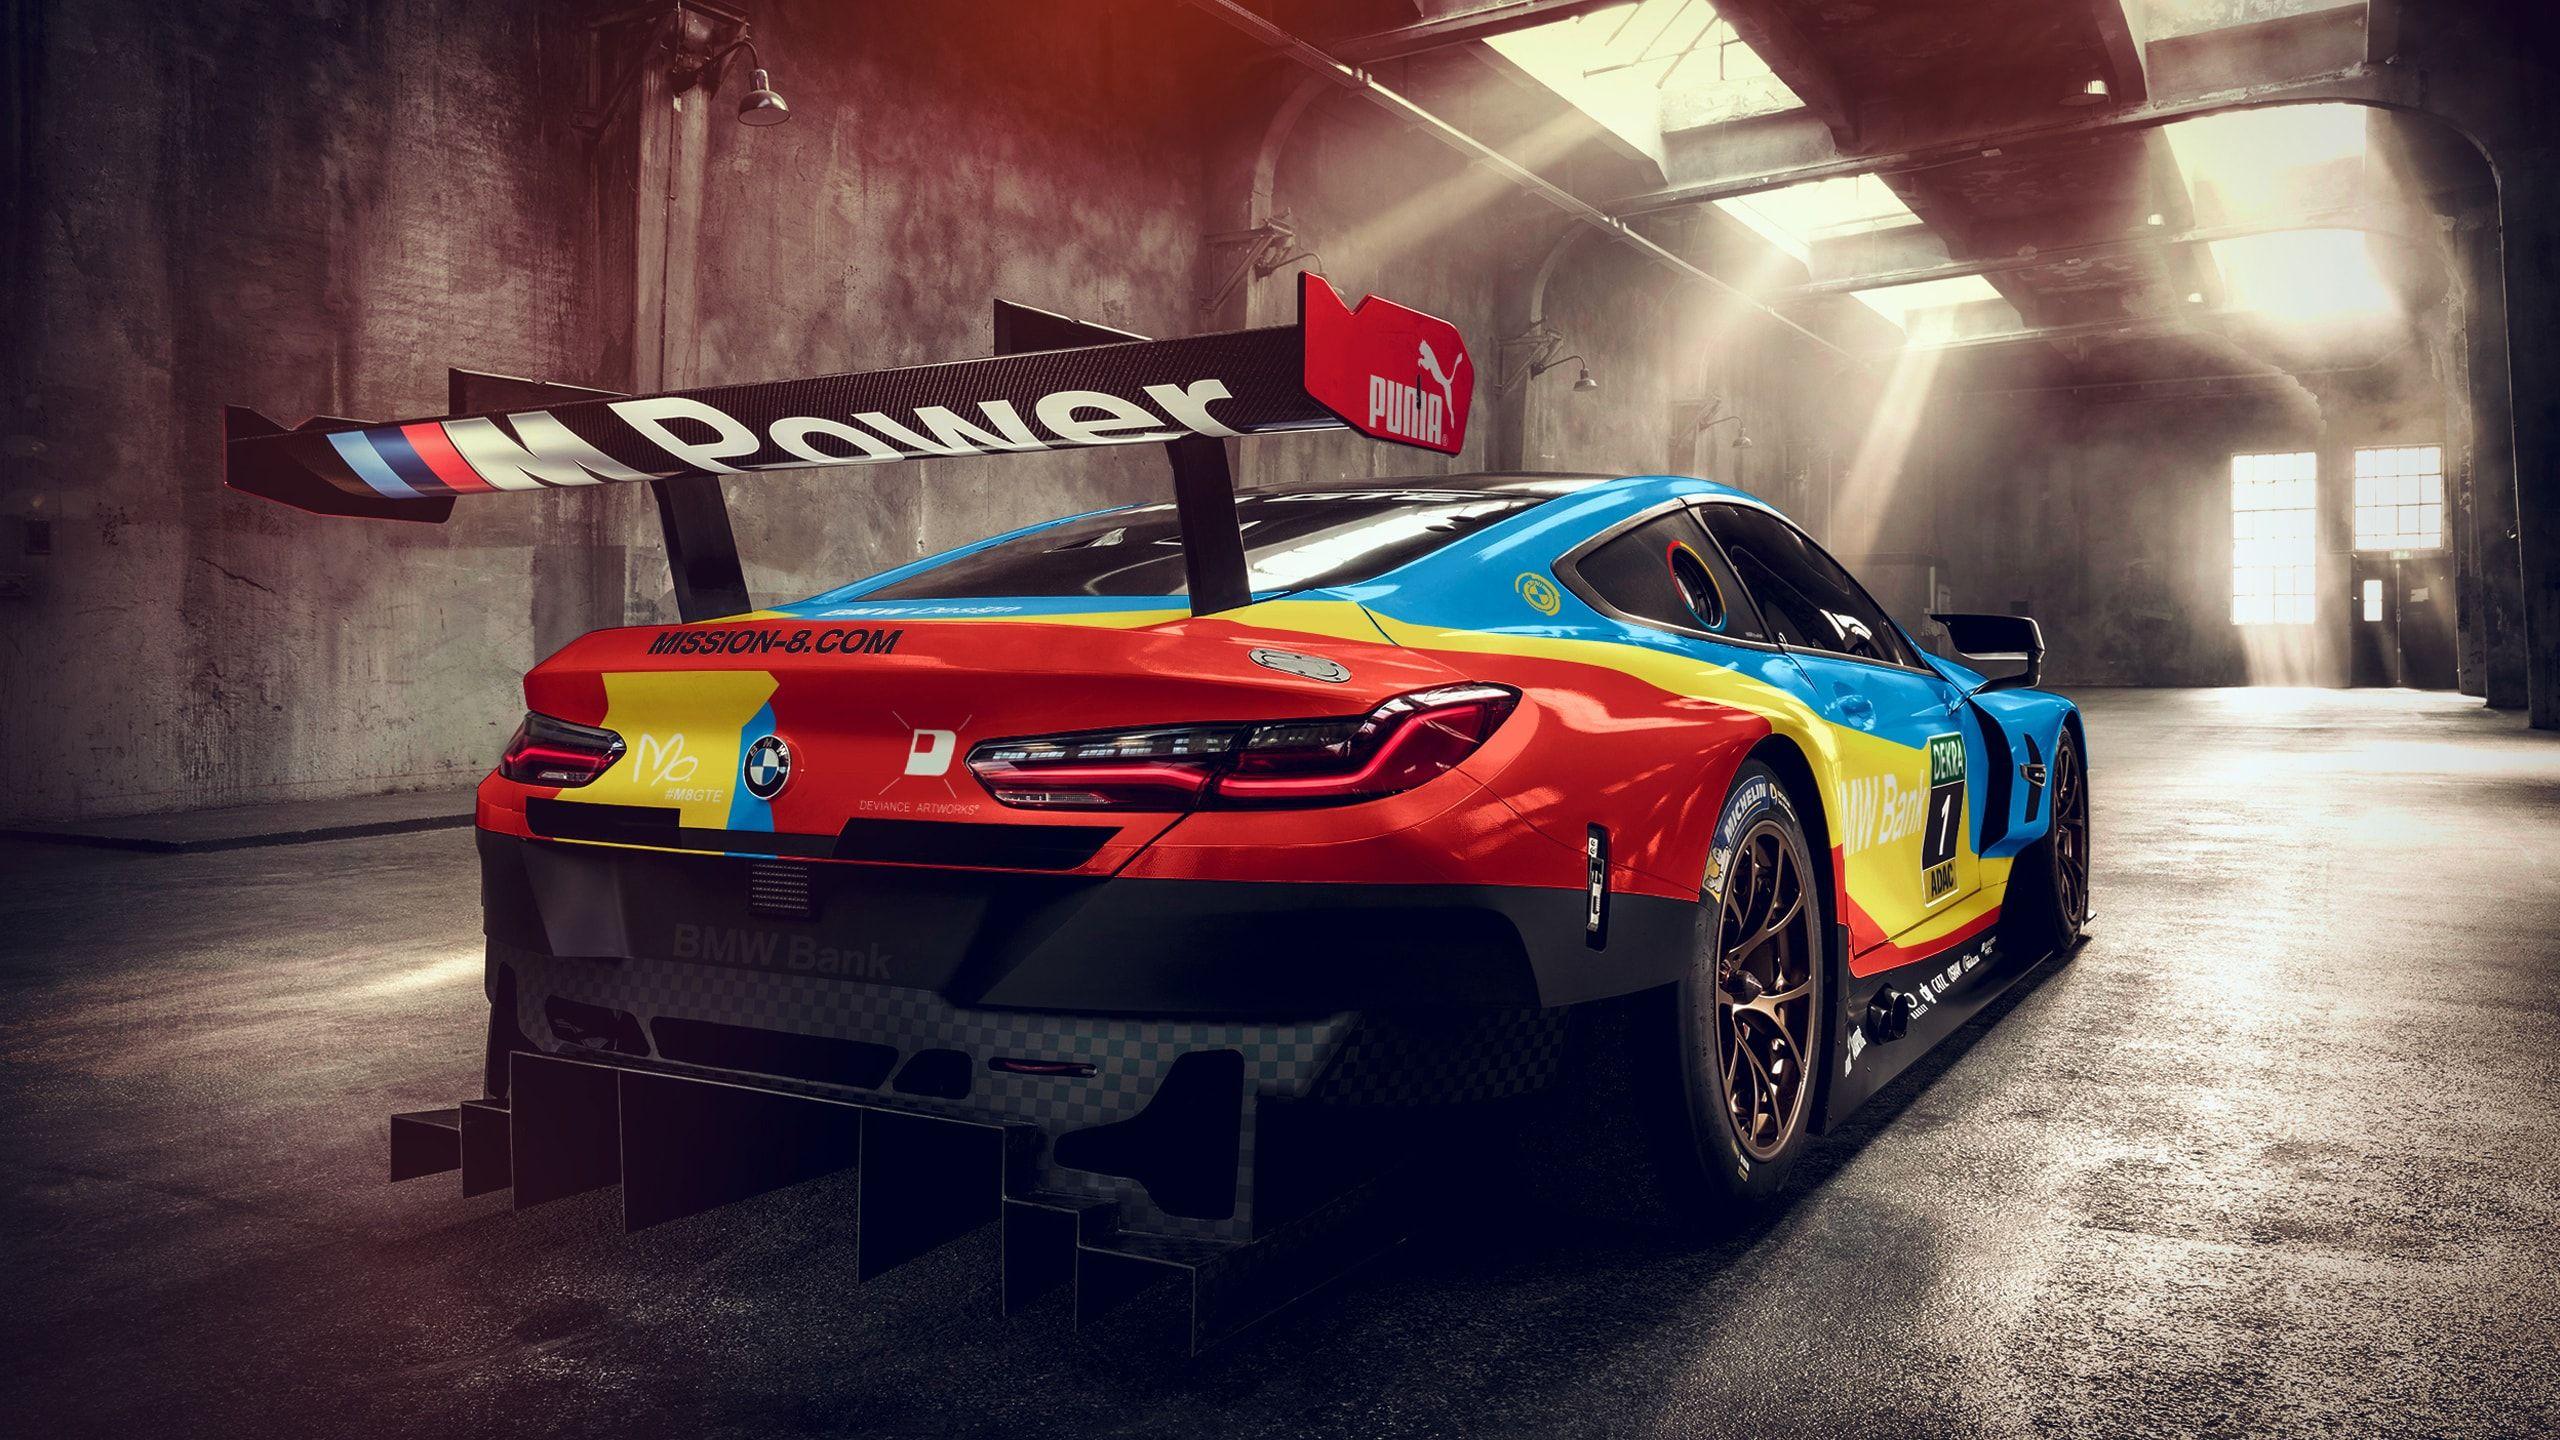 Bmw M8 Gte Rear View Wallpaper and Free. Visual